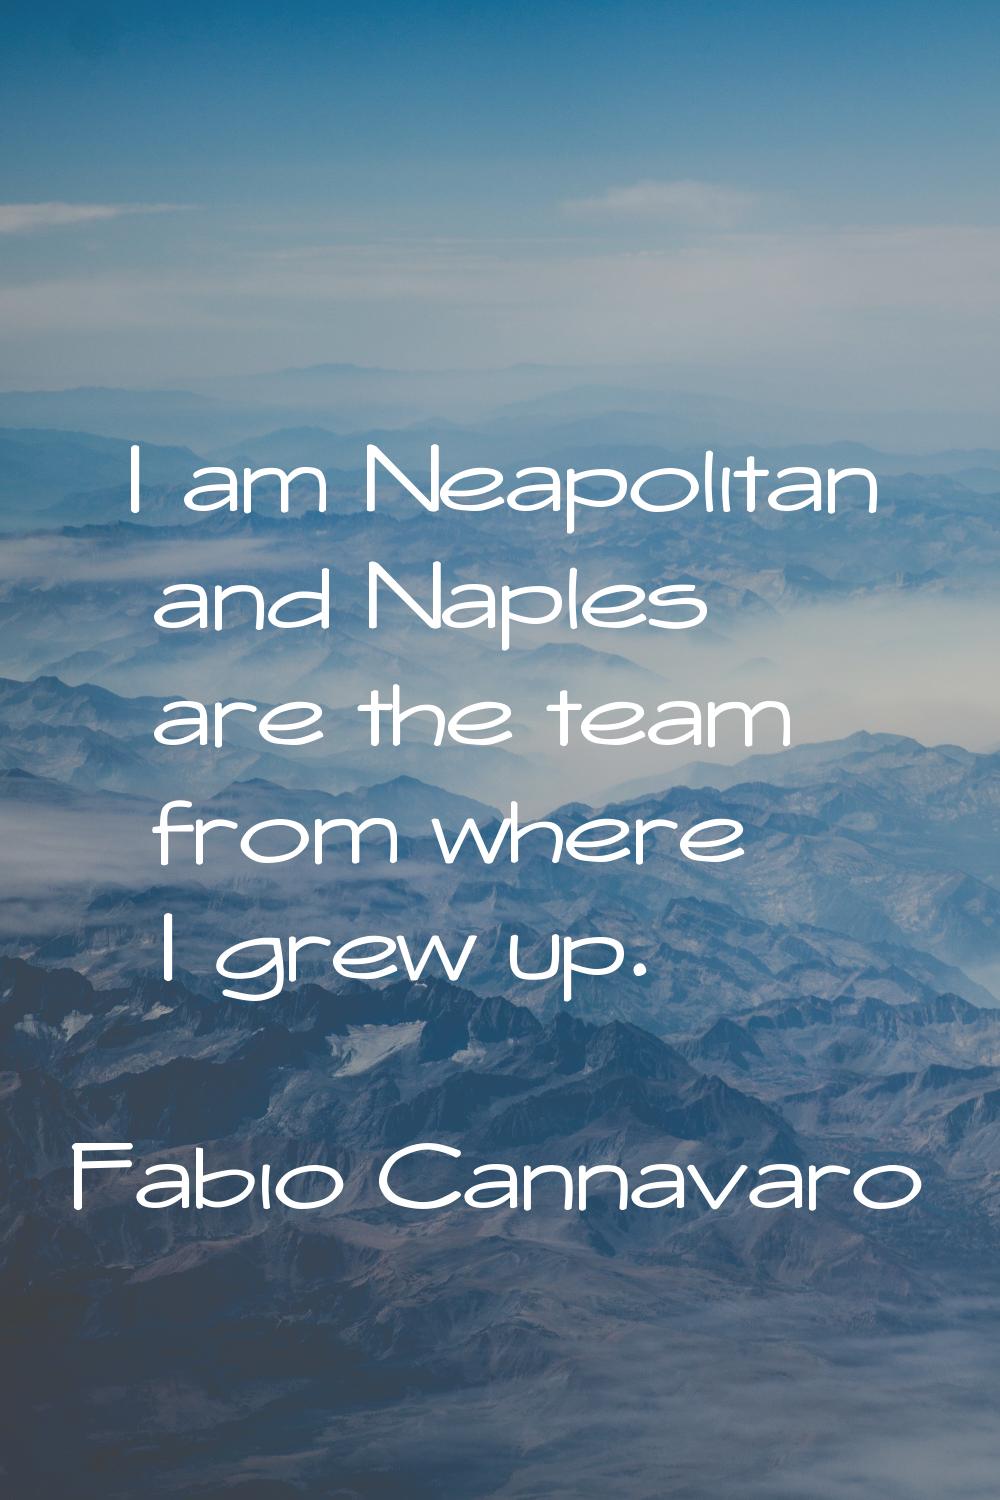 I am Neapolitan and Naples are the team from where I grew up.